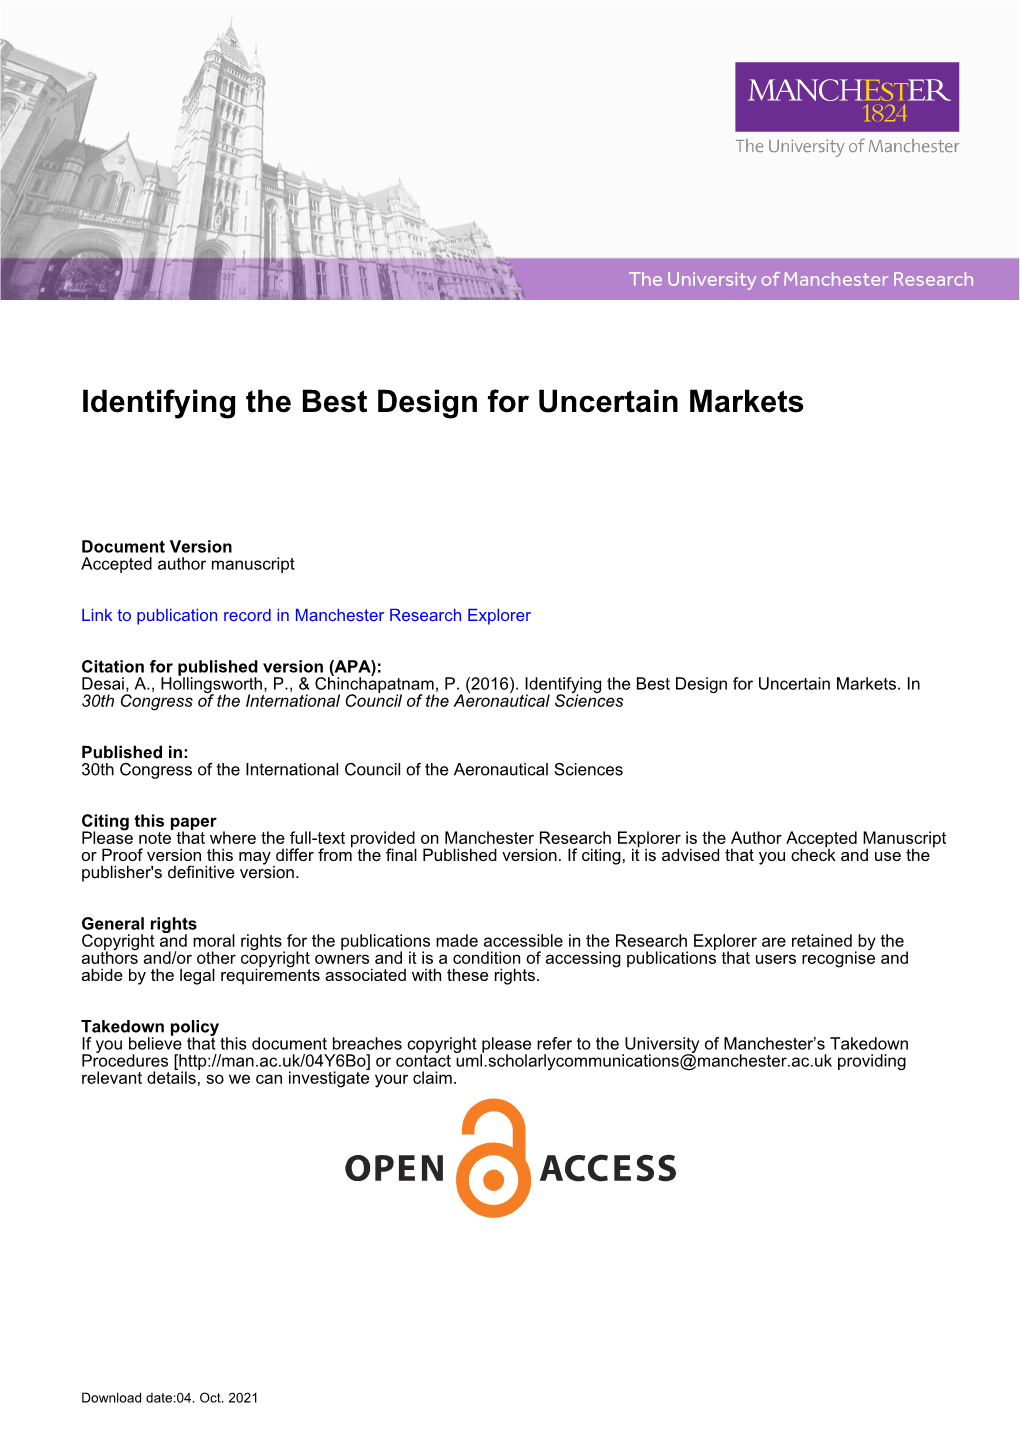 Identifying the Best Design for Uncertain Markets